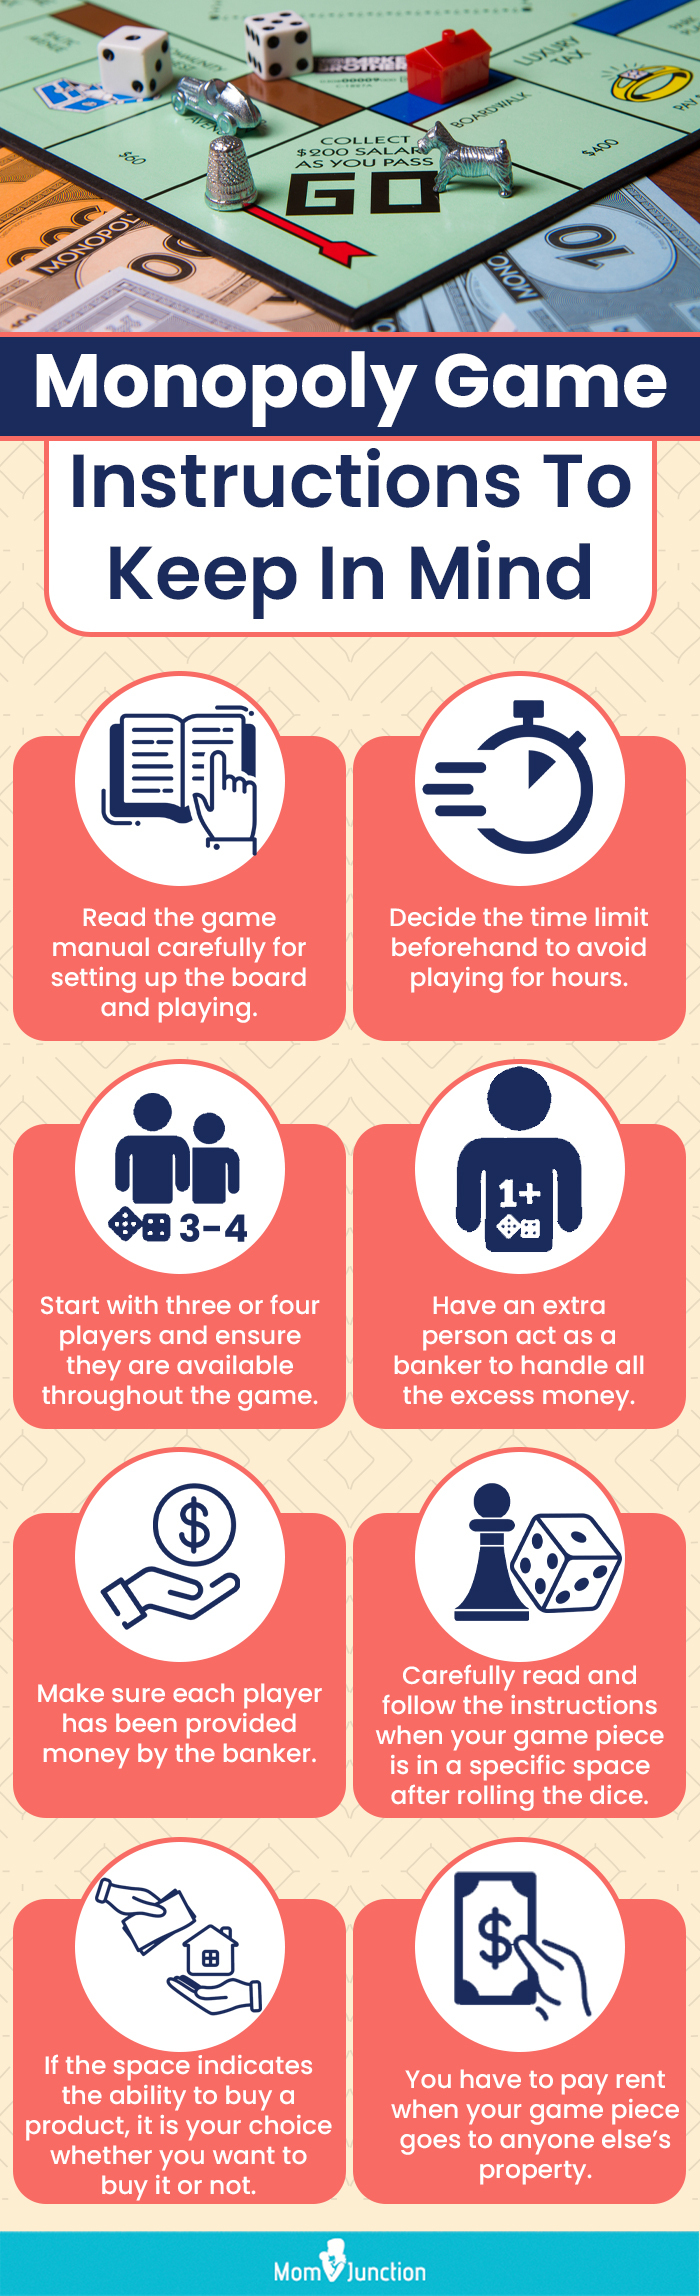 Monopoly Game Instructions To Keep In Mind (infographic)